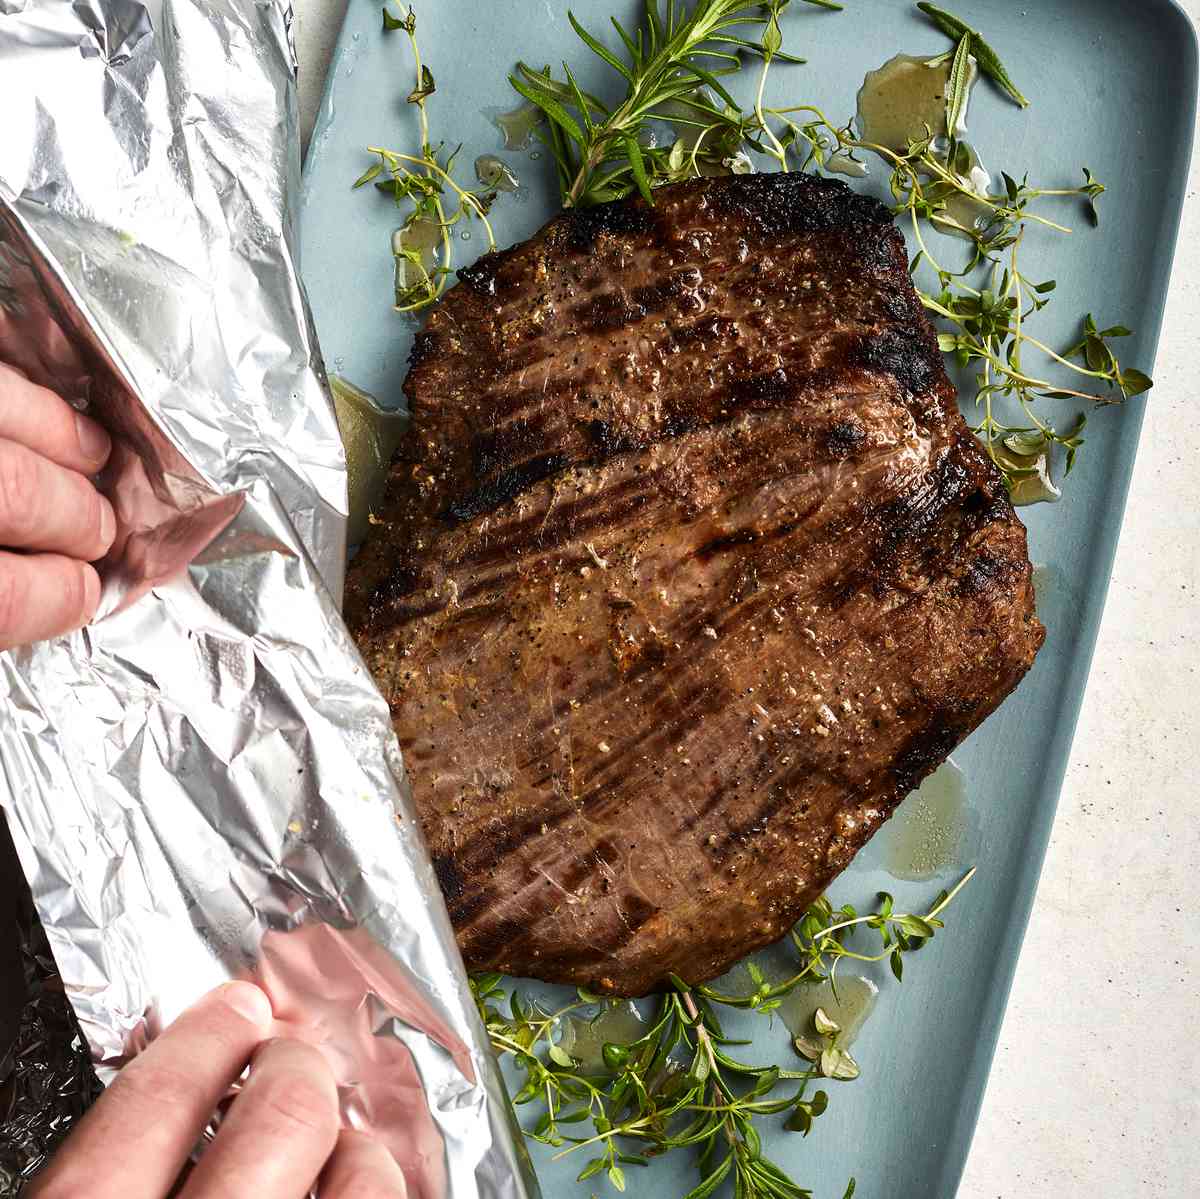 How to Make London Broil